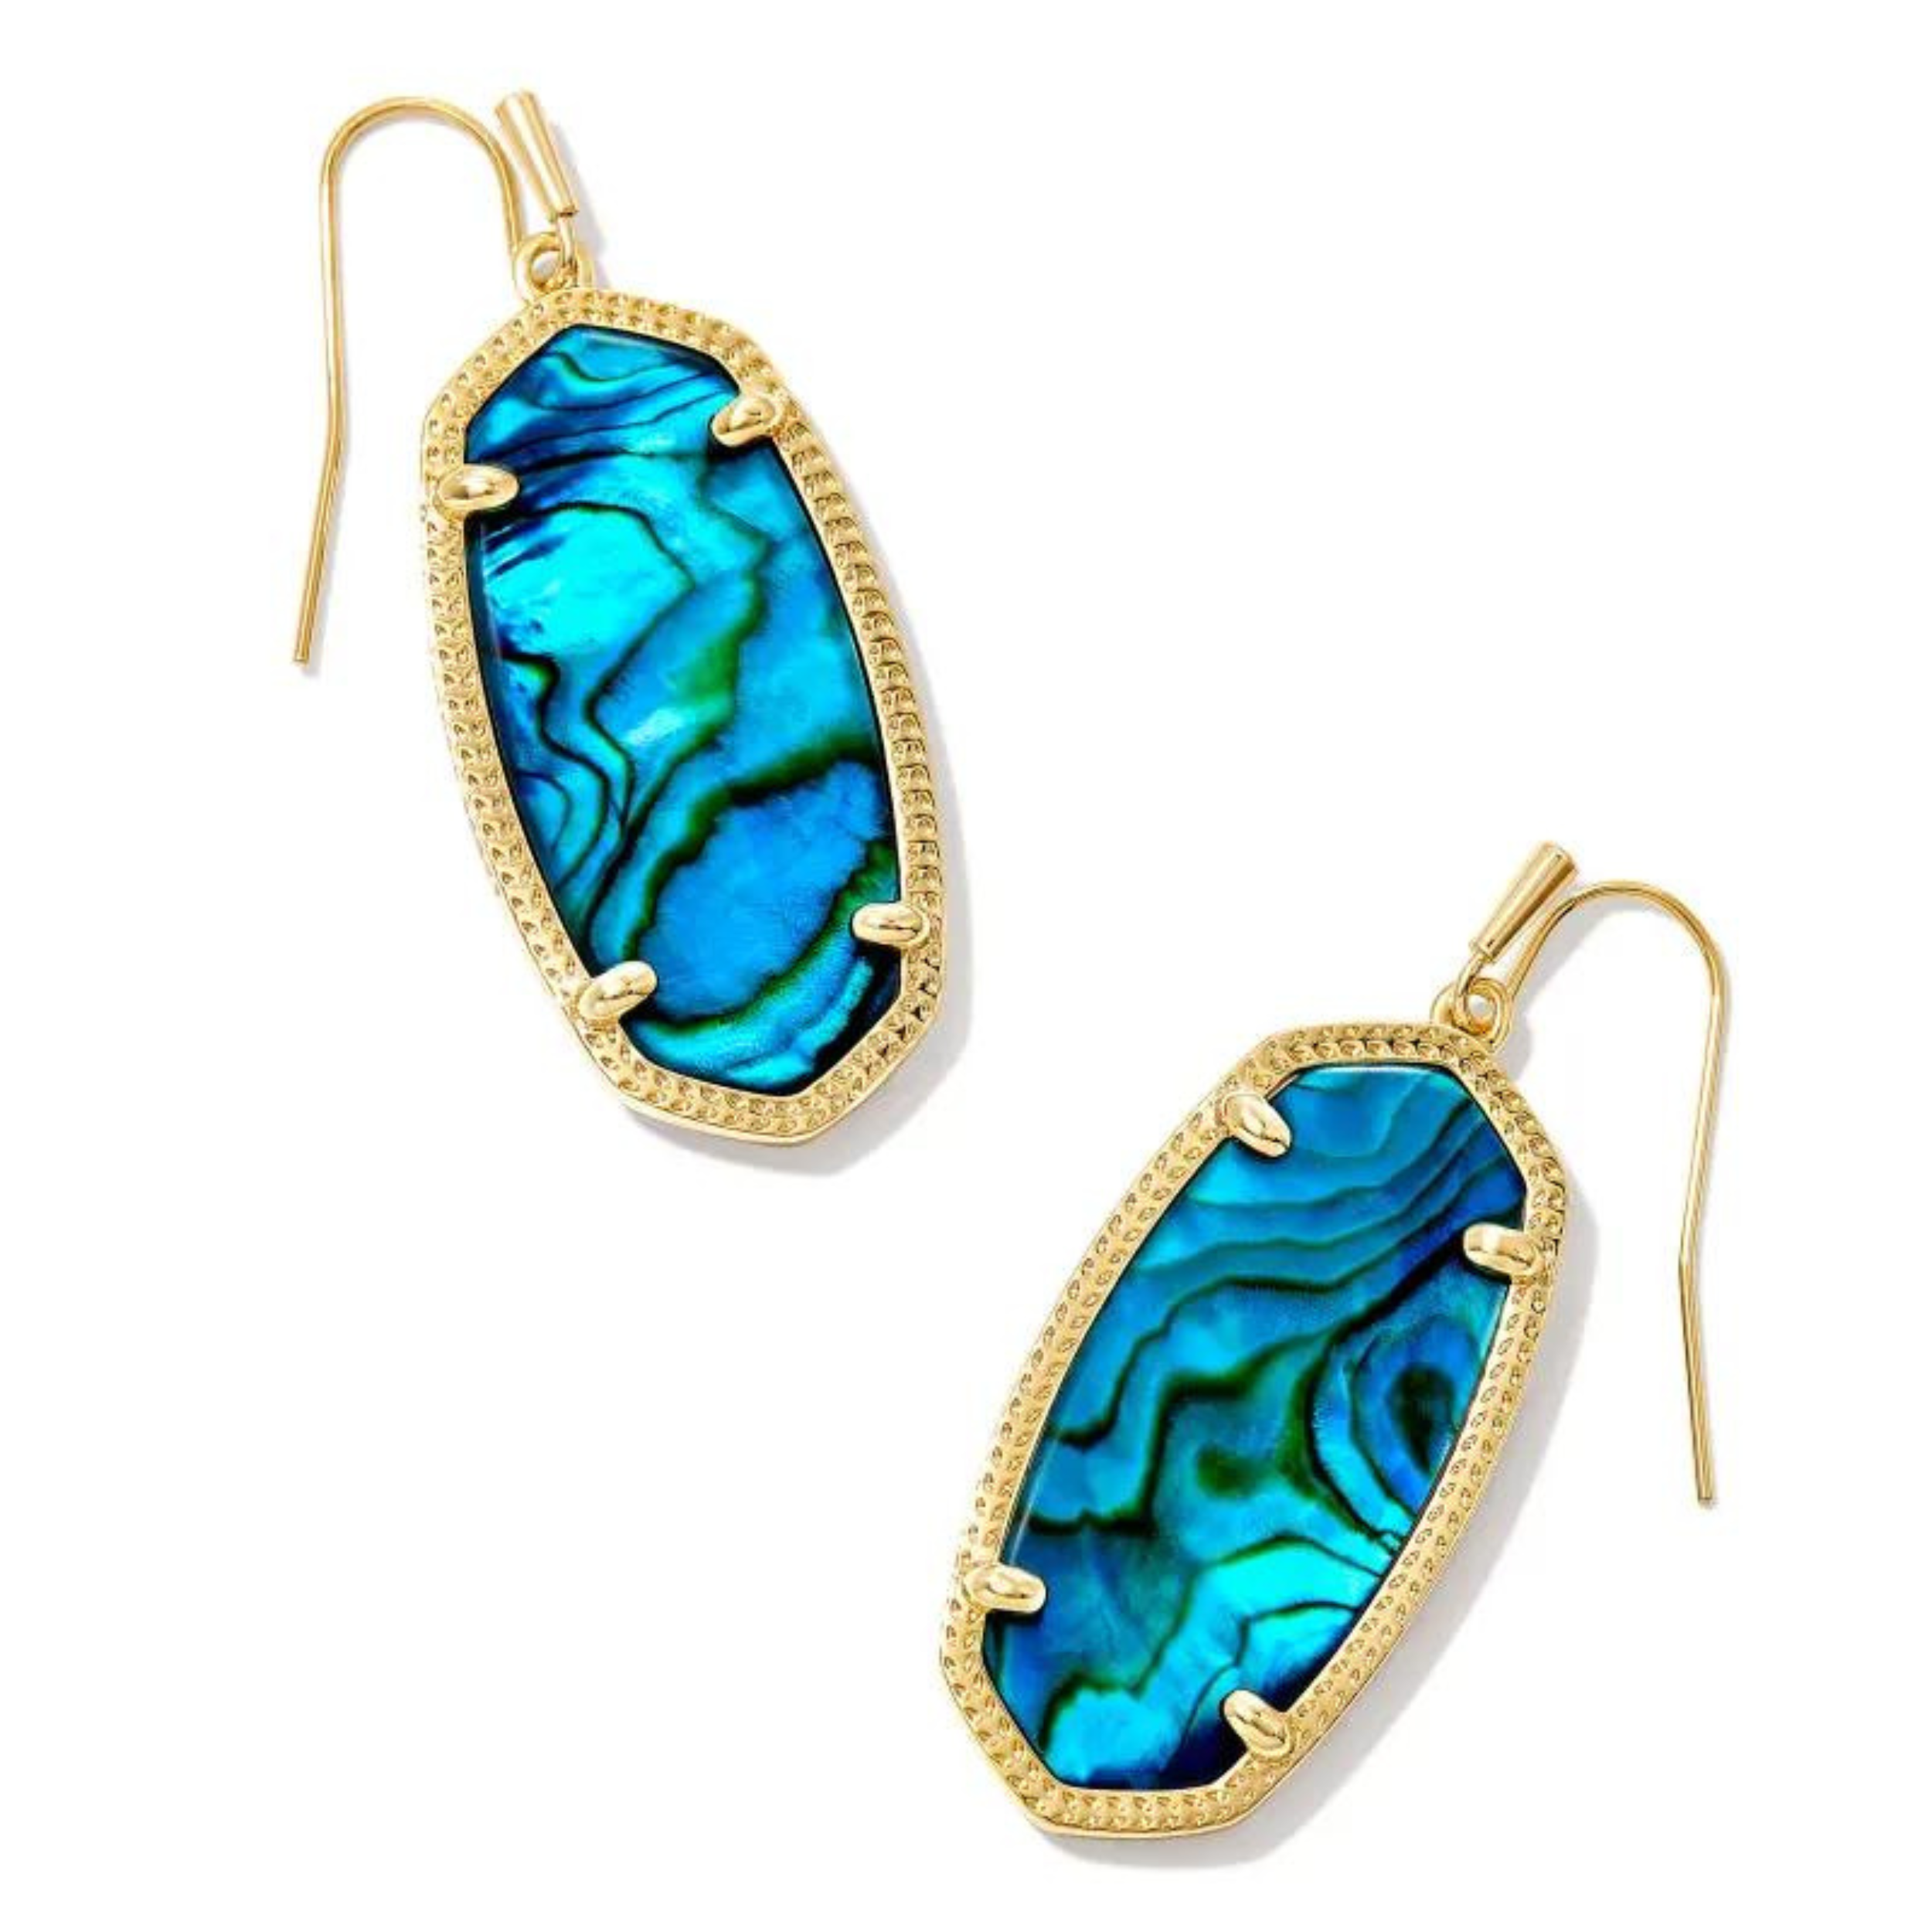 Kendra Scott | Elle Gold Drop Earrings in Teal Abalone. Pictured on a white background.